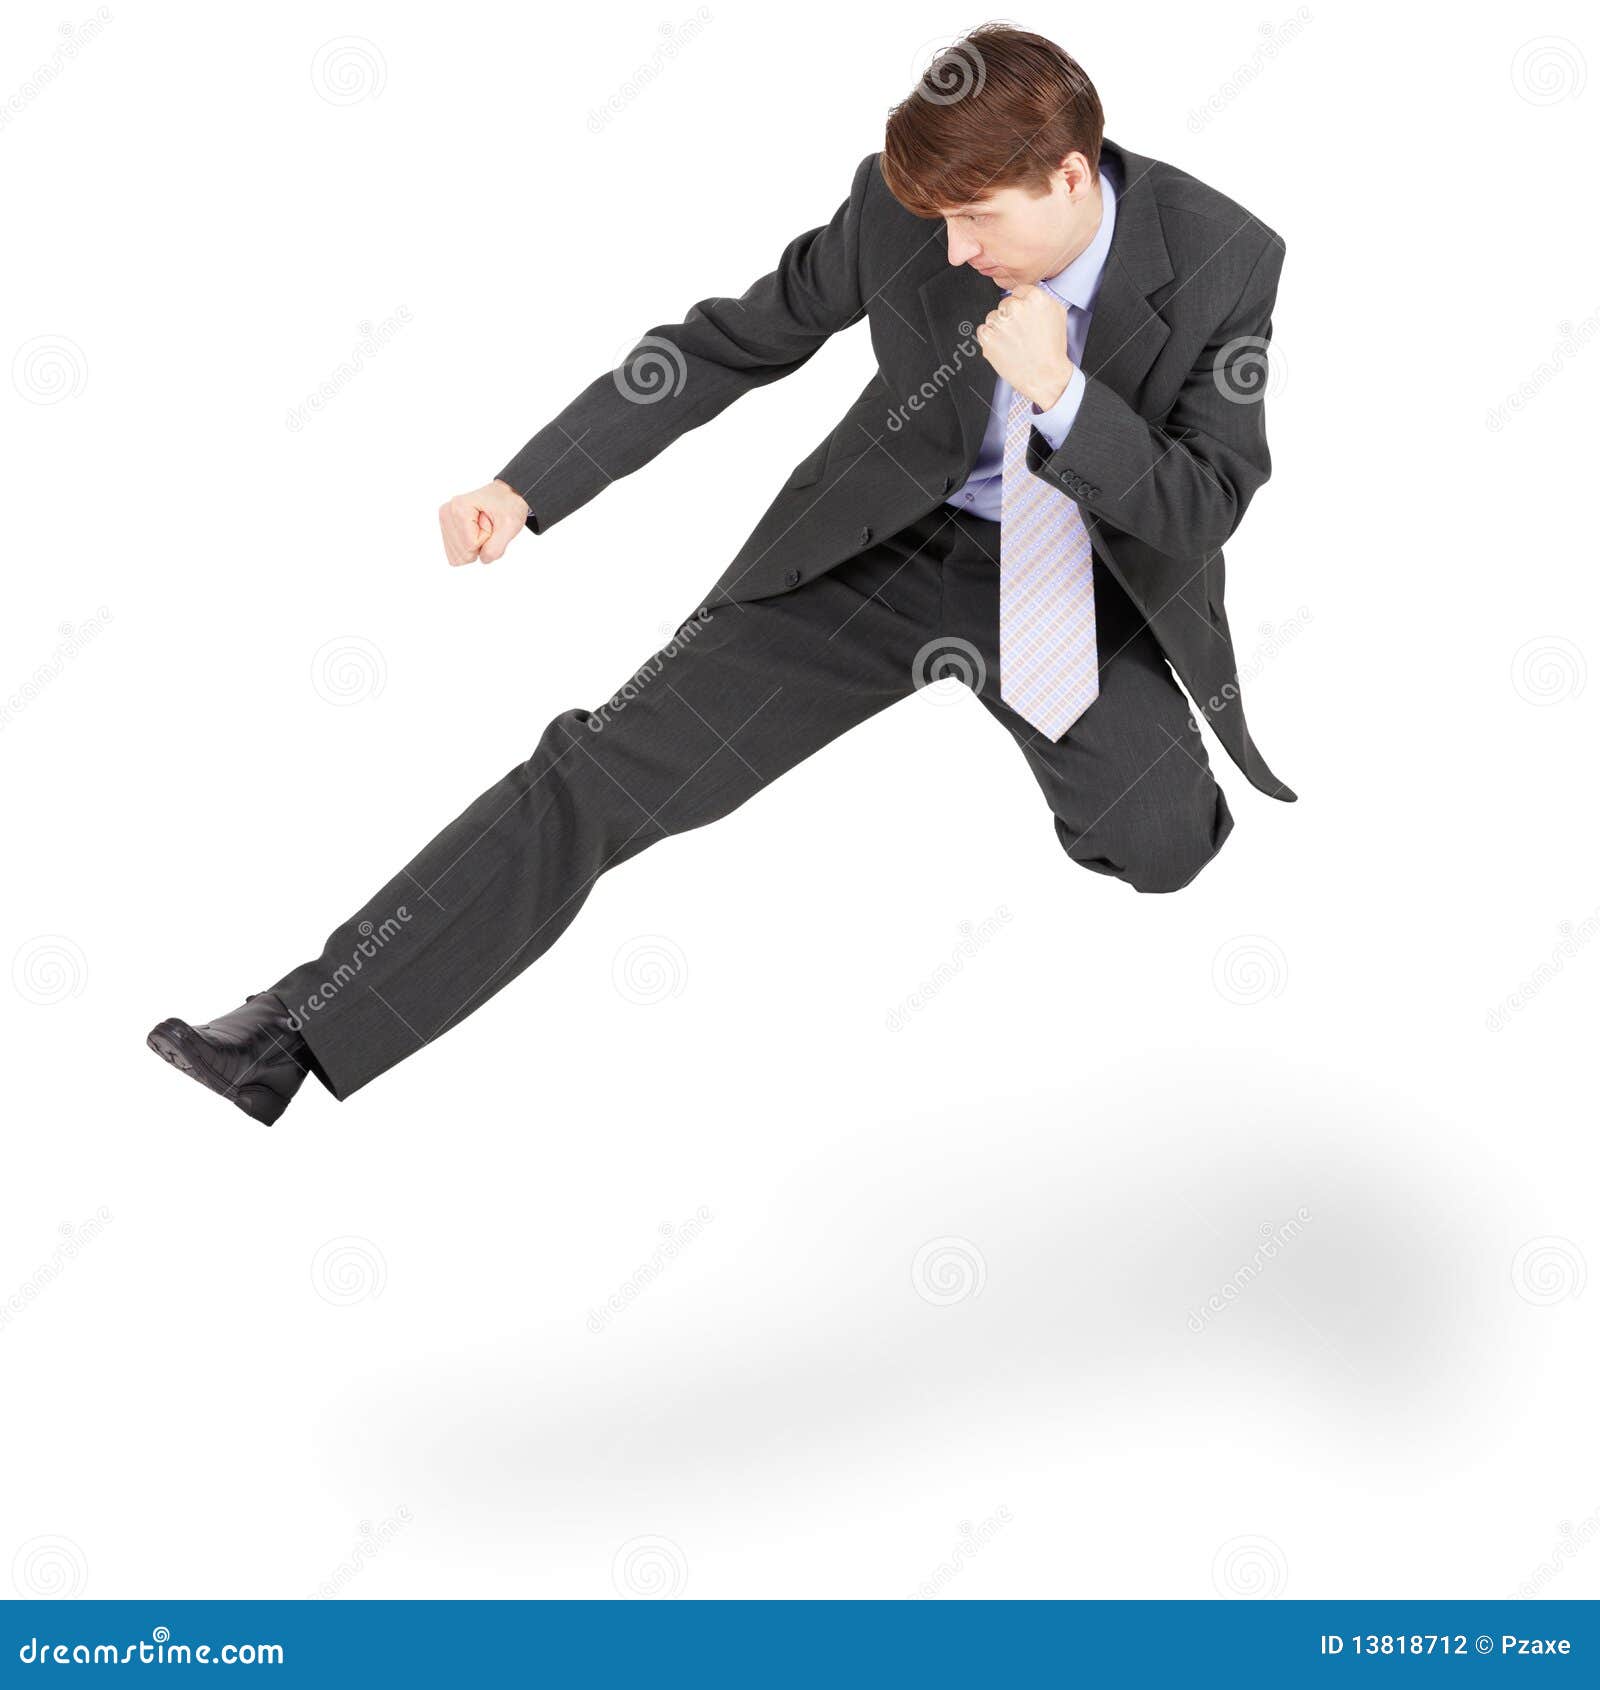 Businessman Being Kicked Out By His Employer Free Image and Photograph  26196001.